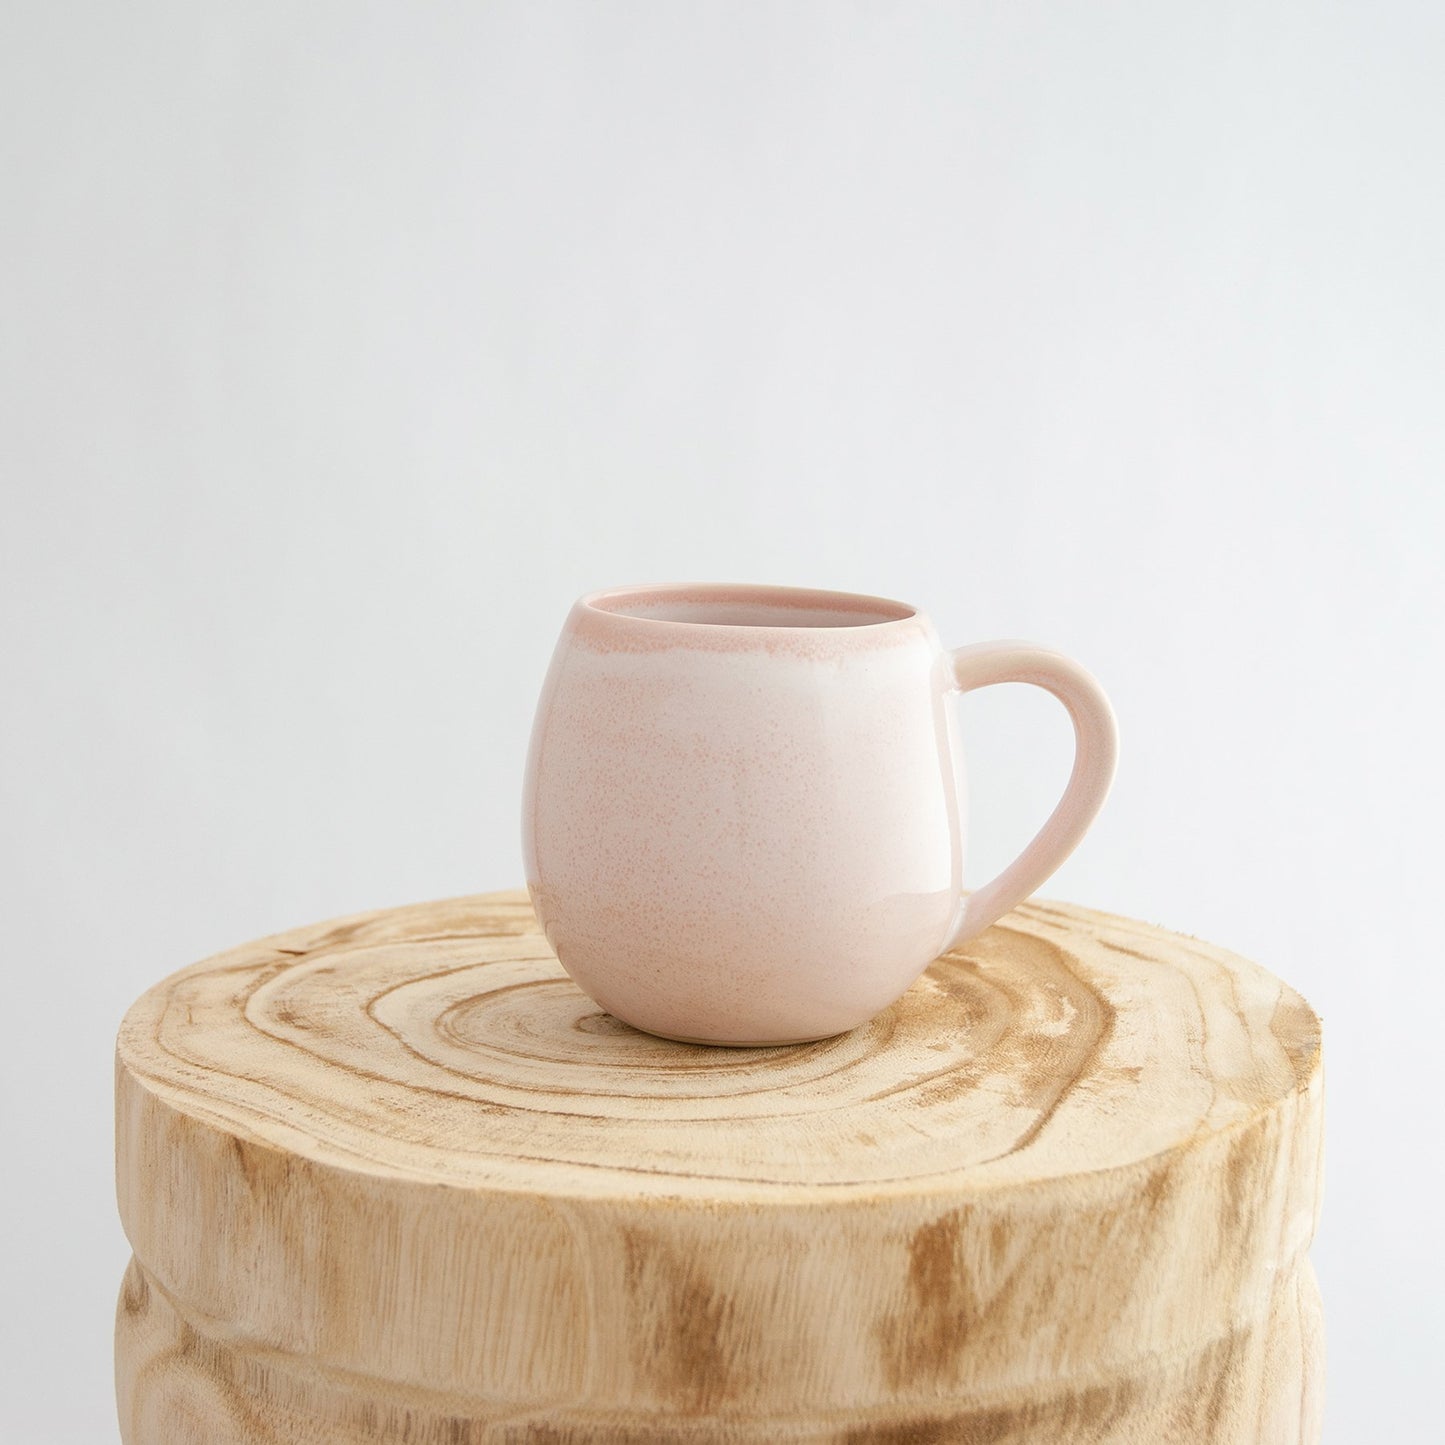 Robert Gordon rose quartz pink canvas mug coffee cup sitting on a natural wooden round side table